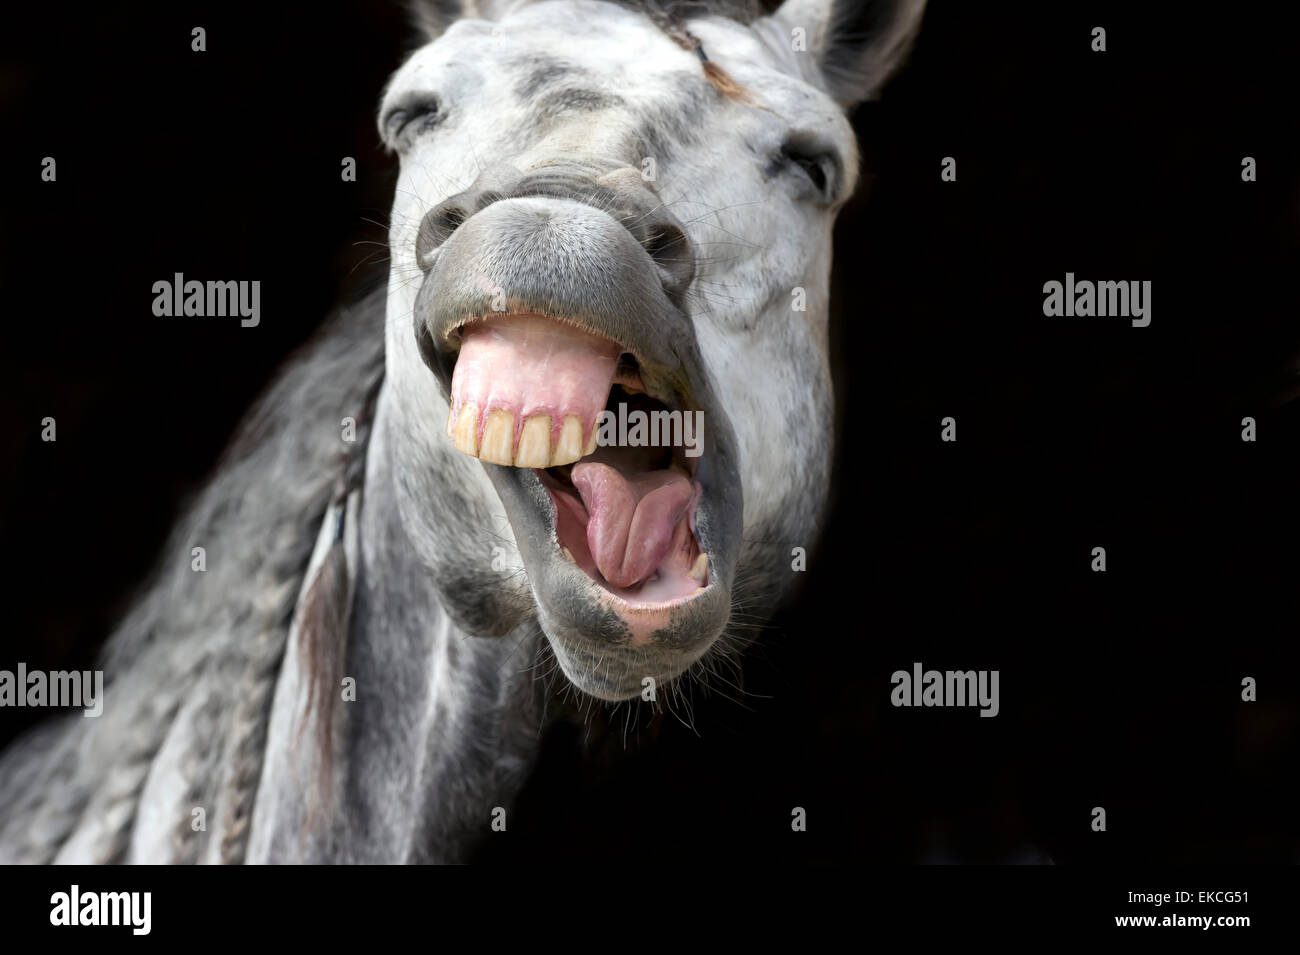 Funny happy white horse is laughing against a dark black background. Stock Photo